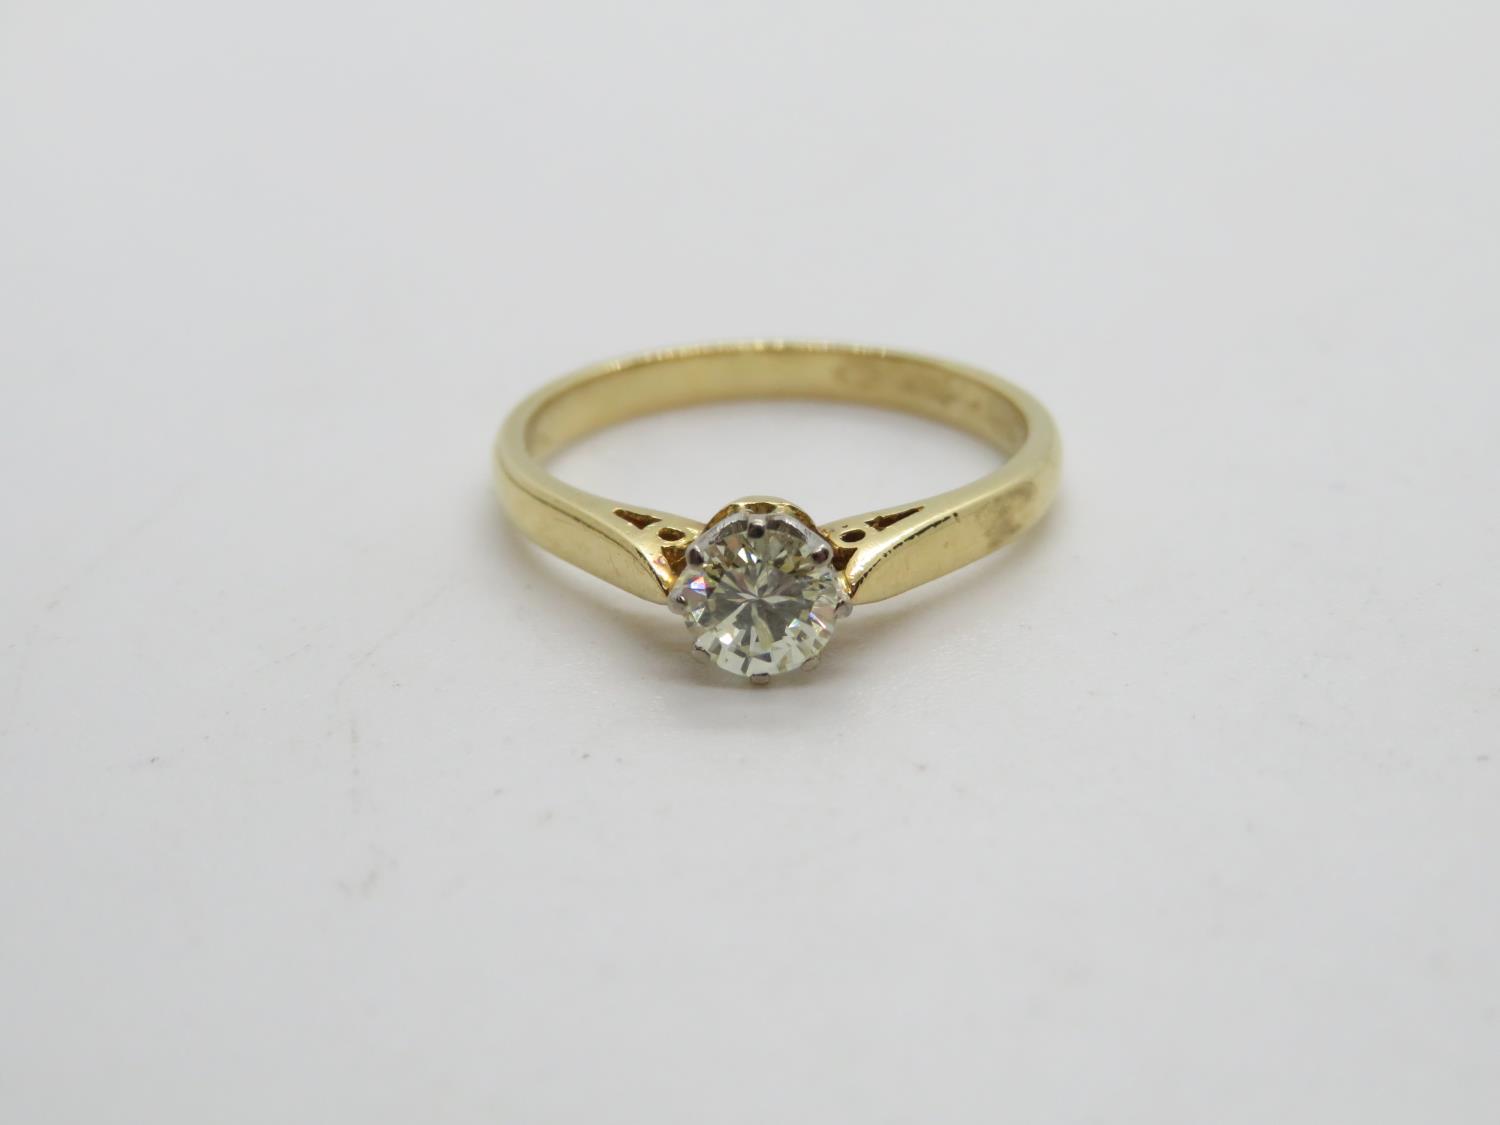 HM 18ct gold solitaire diamond ring size L and a half 2.58g